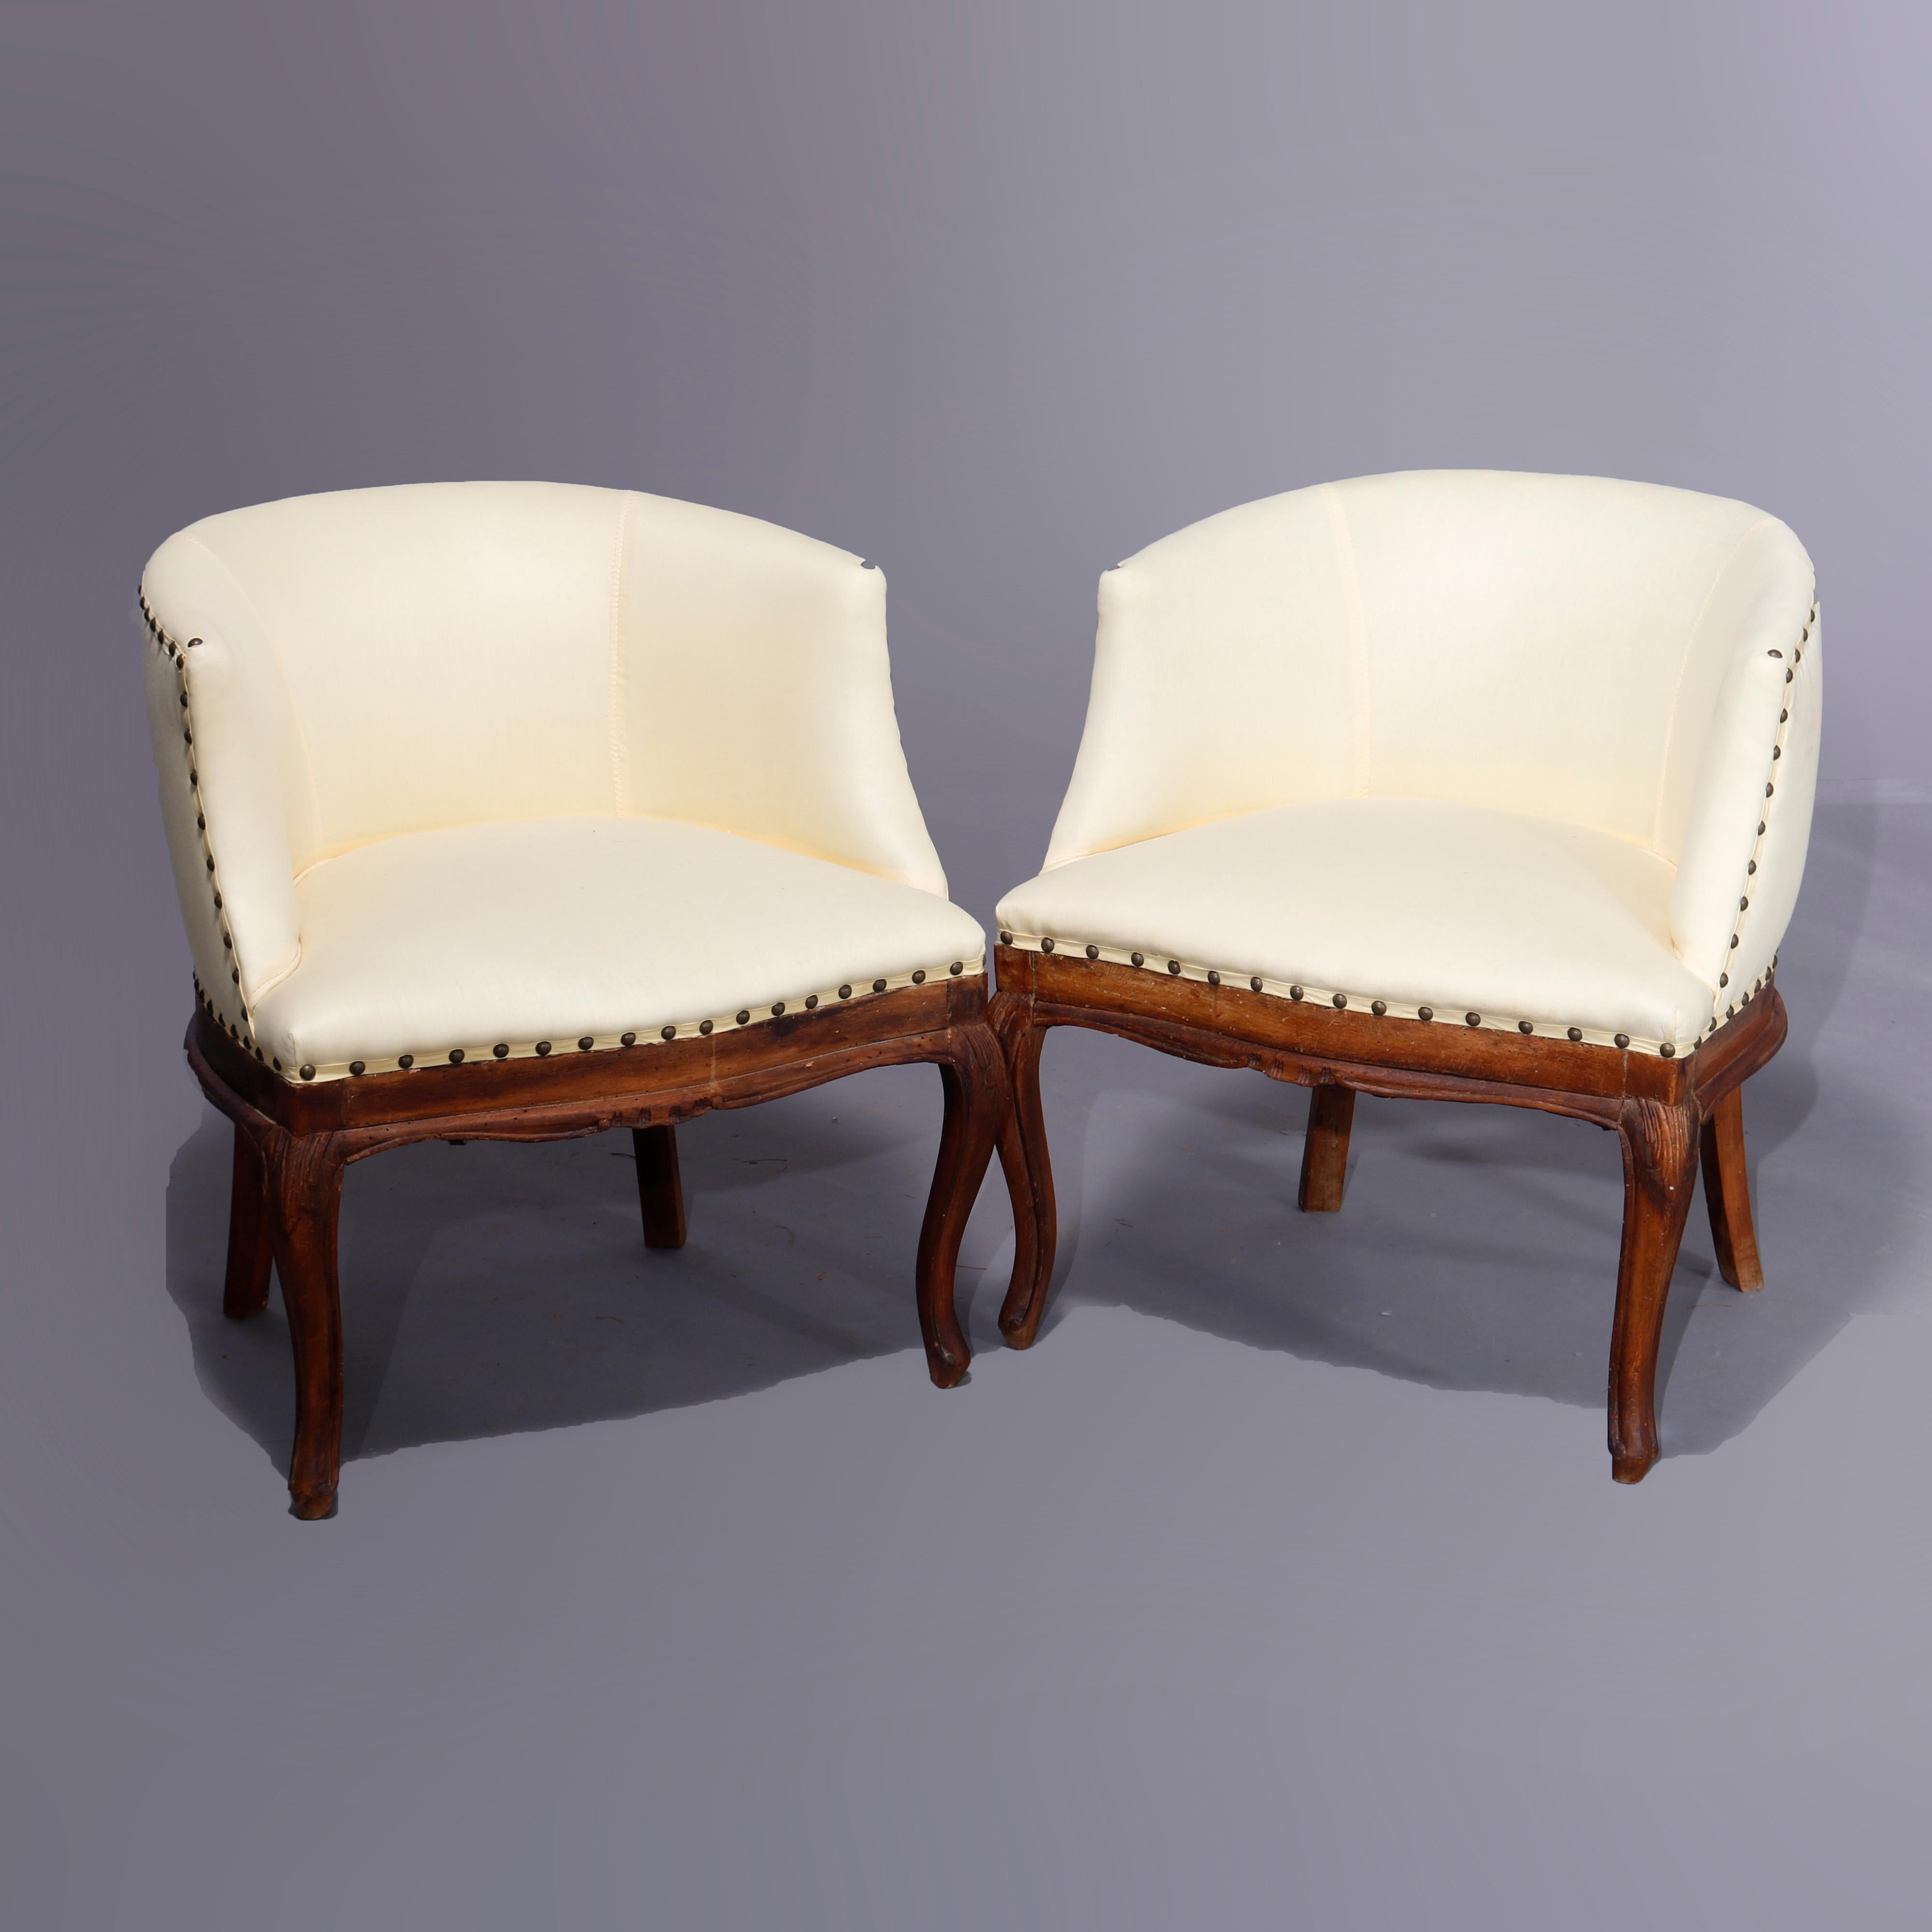 Upholstery Antique Italian Walnut Side or Lounge Chairs, Late 18th to Early 19th Century